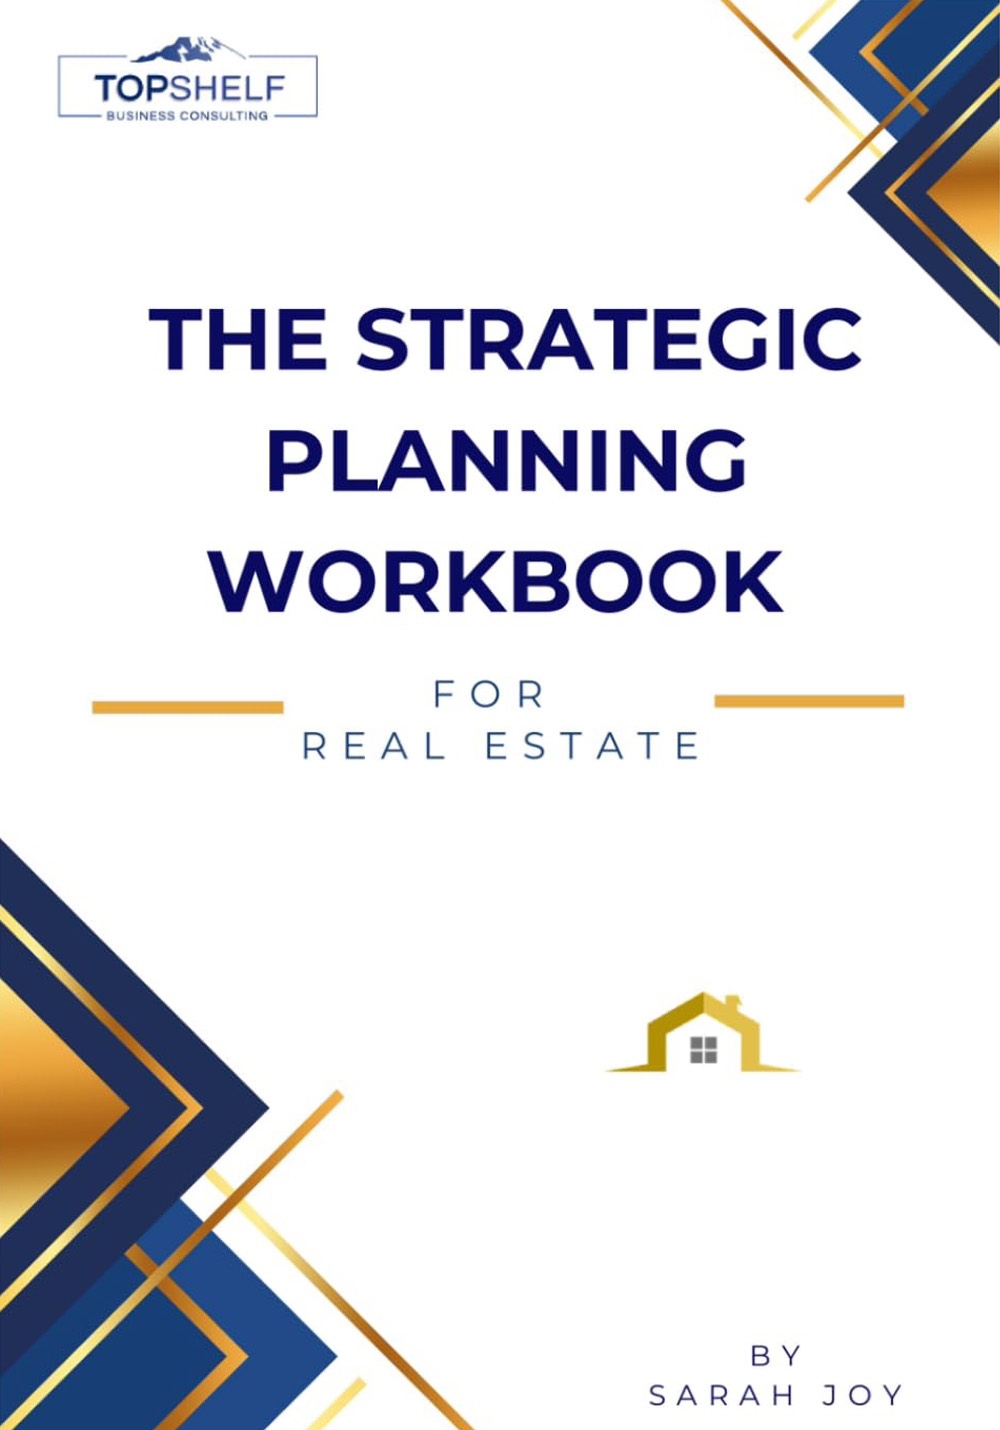 The Strategic Planning Workbook for Real Estate